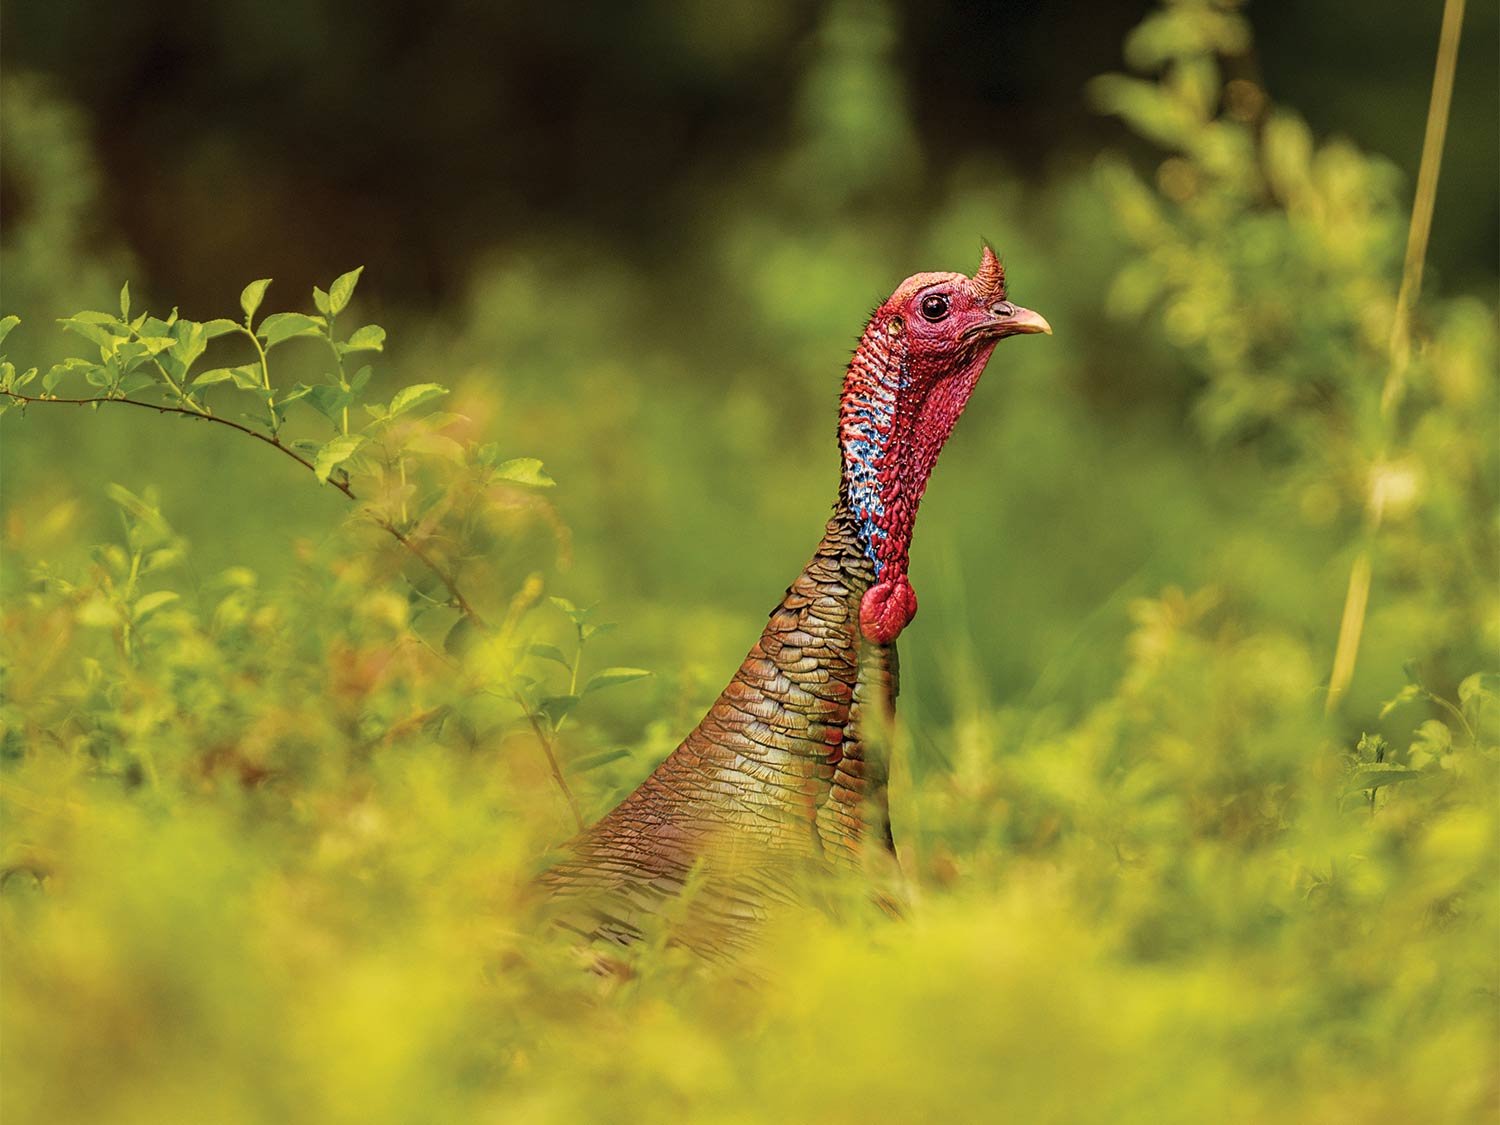 A turkey in a weed and grass field.